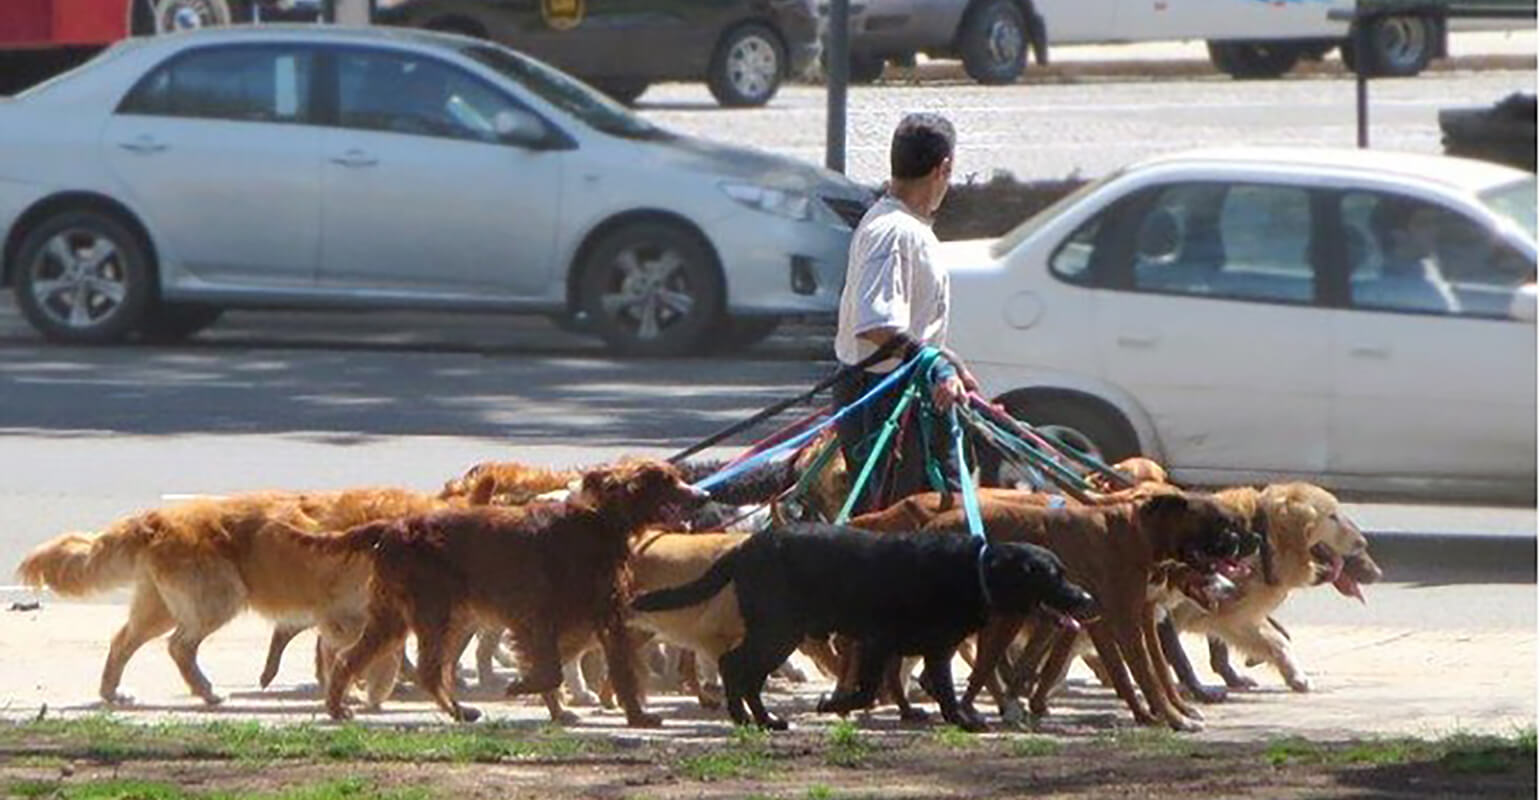 This is an image of a person with short black hair walking a dozen dogs on leashes on a car-lined street.